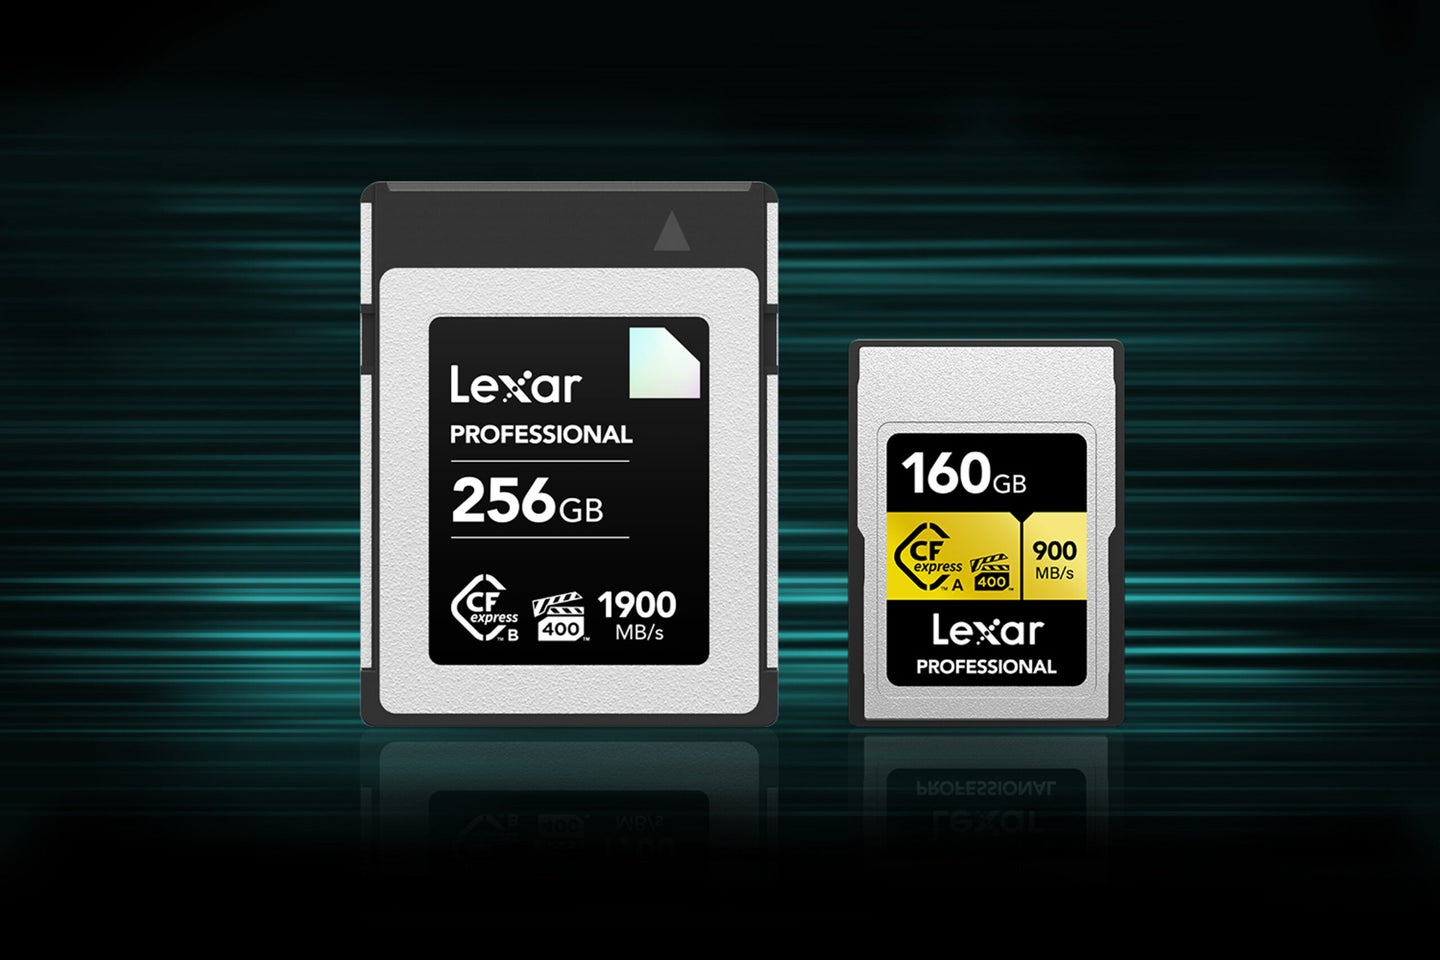 Lexar’ CFexpress Type-B cards will soon be much faster and it now has Type-A cards, too.